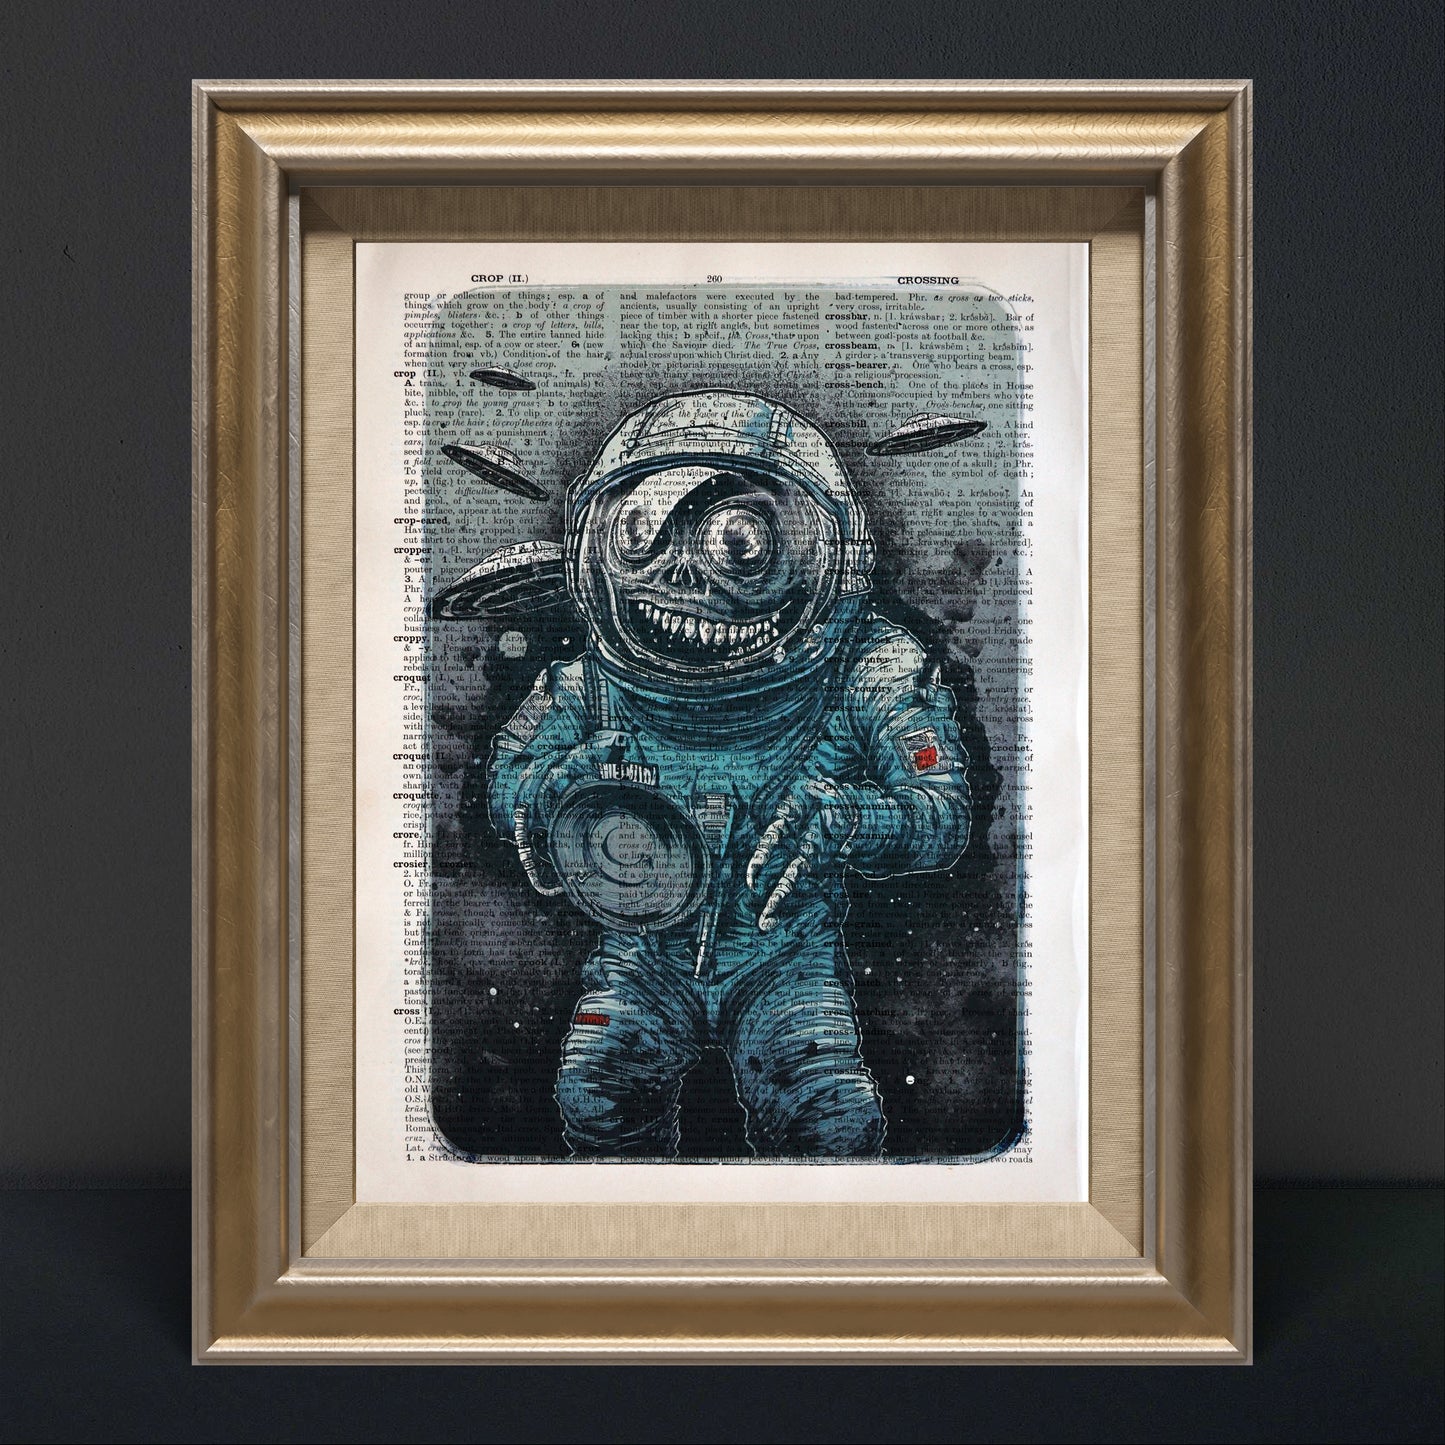 "Cosmic Plague" digital art features an eerie astronaut-like figure and flying saucers on a 1930s dictionary page.